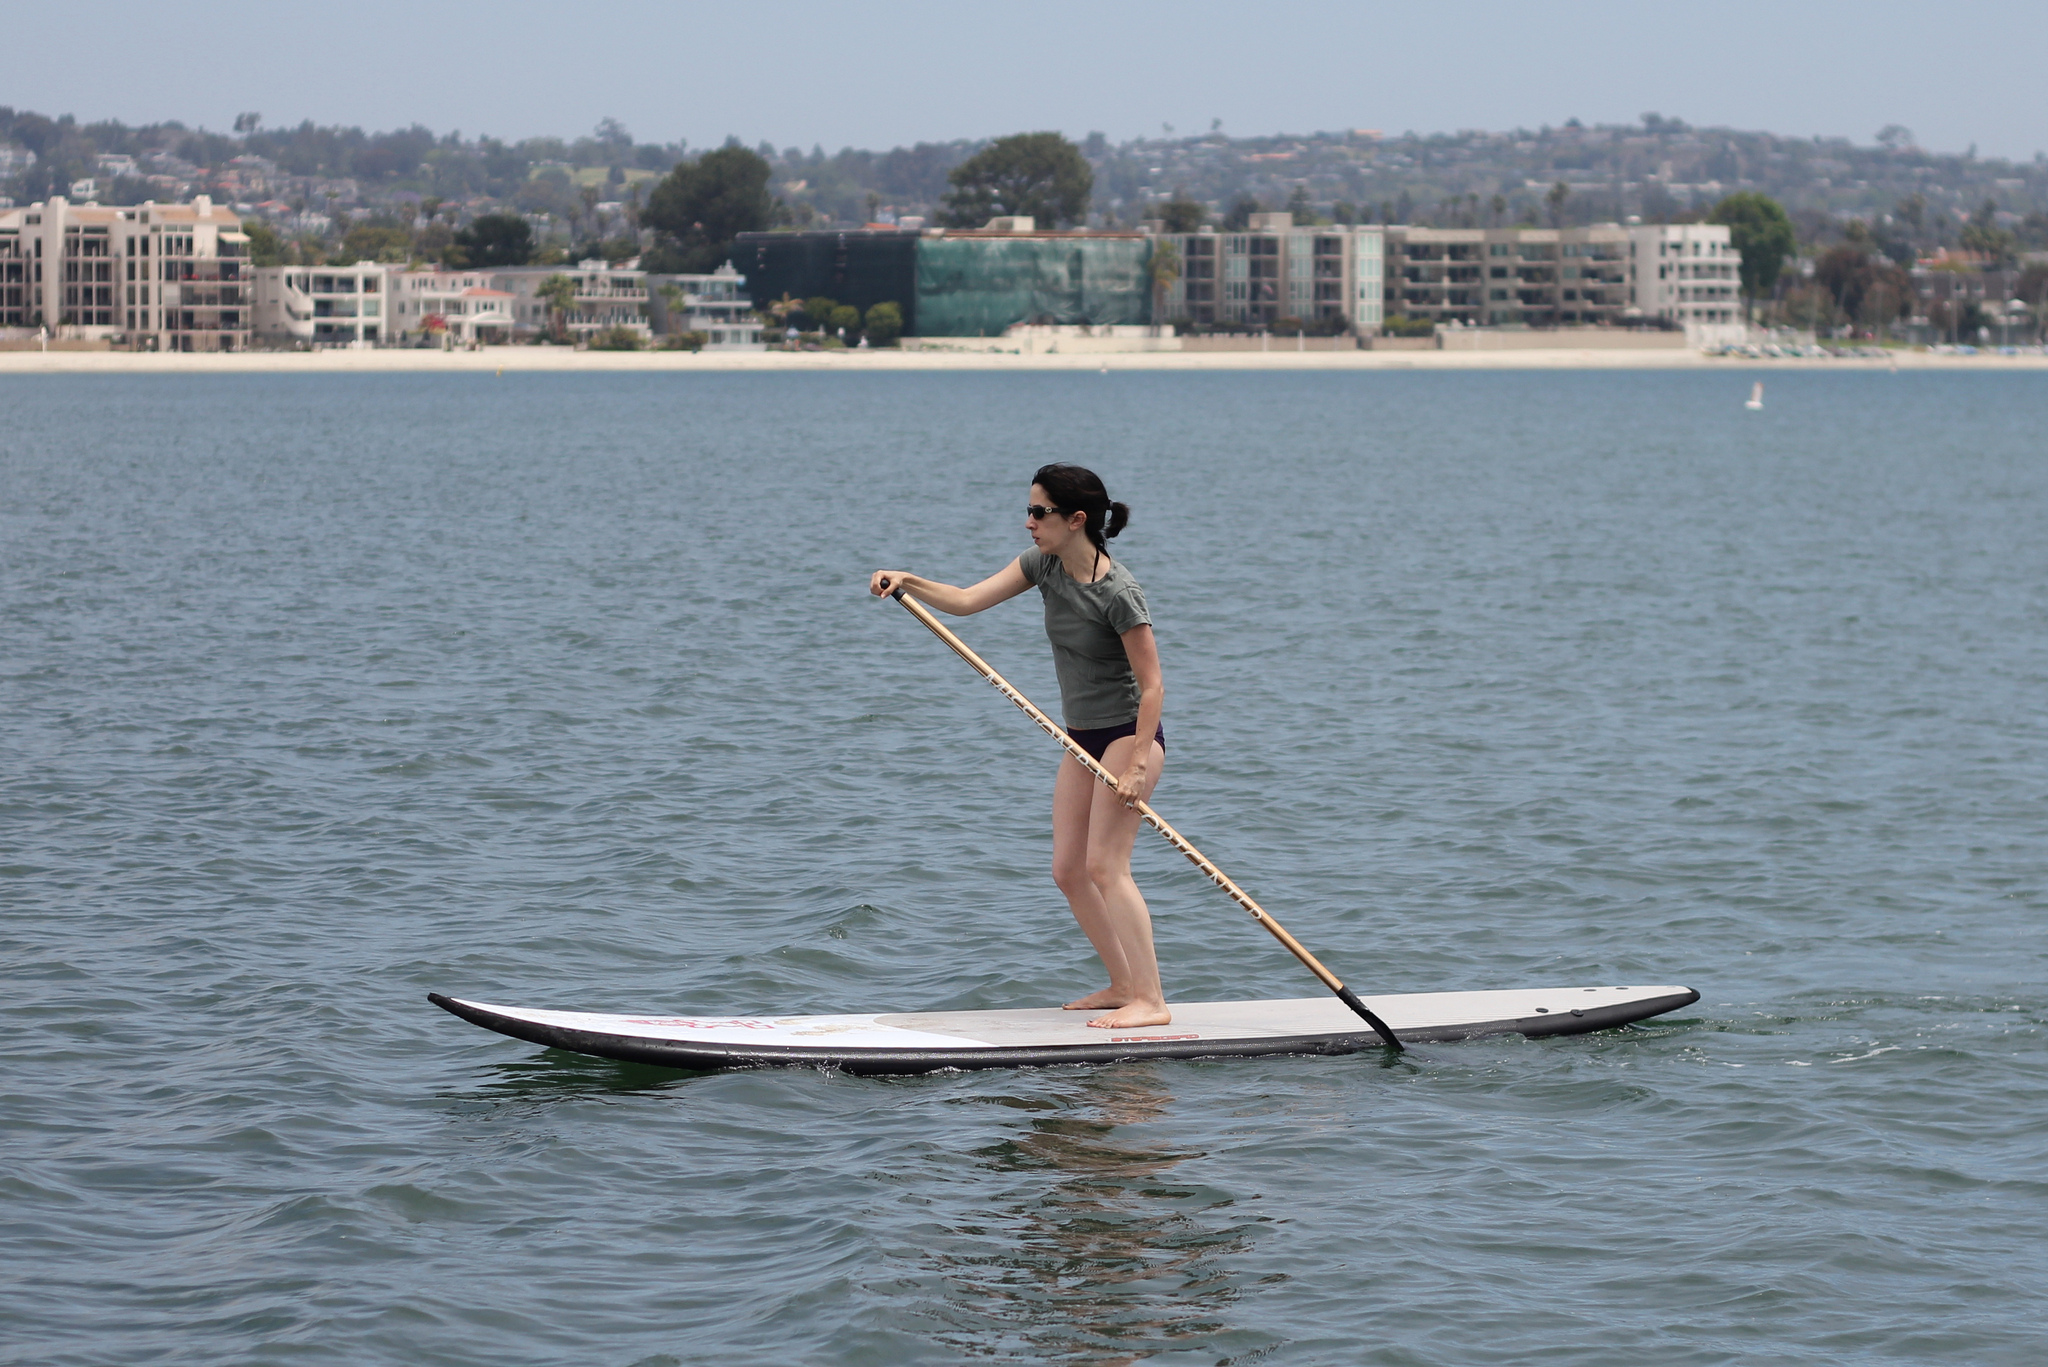 Get Wet and Stay Safe when you go paddleboarding this summer